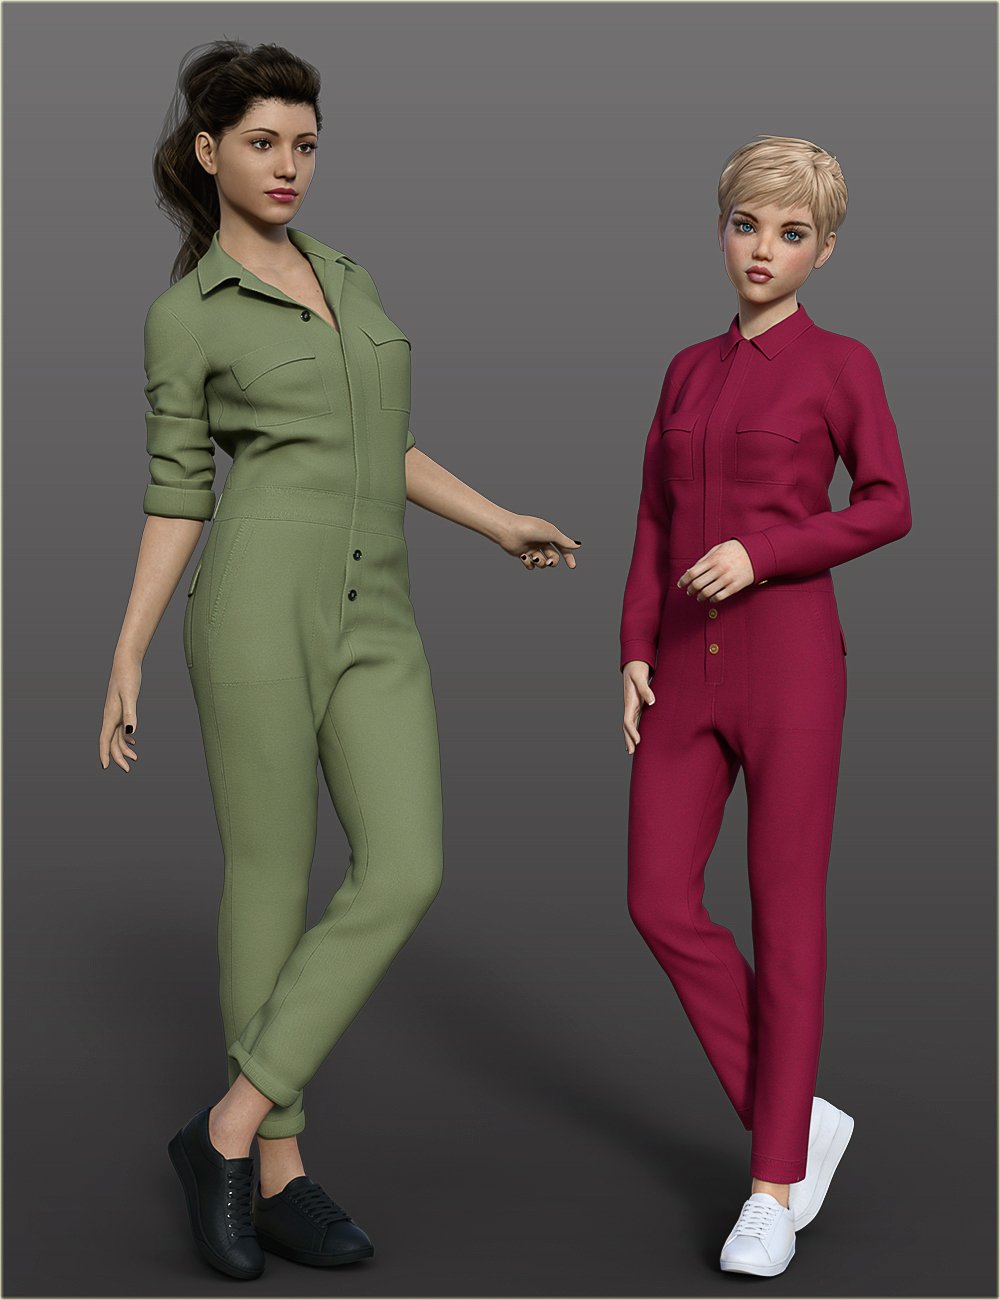 dForce H&C Coverall jumpsuit outfits for Genesis 8 Female(s) by: IH Kang, 3D Models by Daz 3D